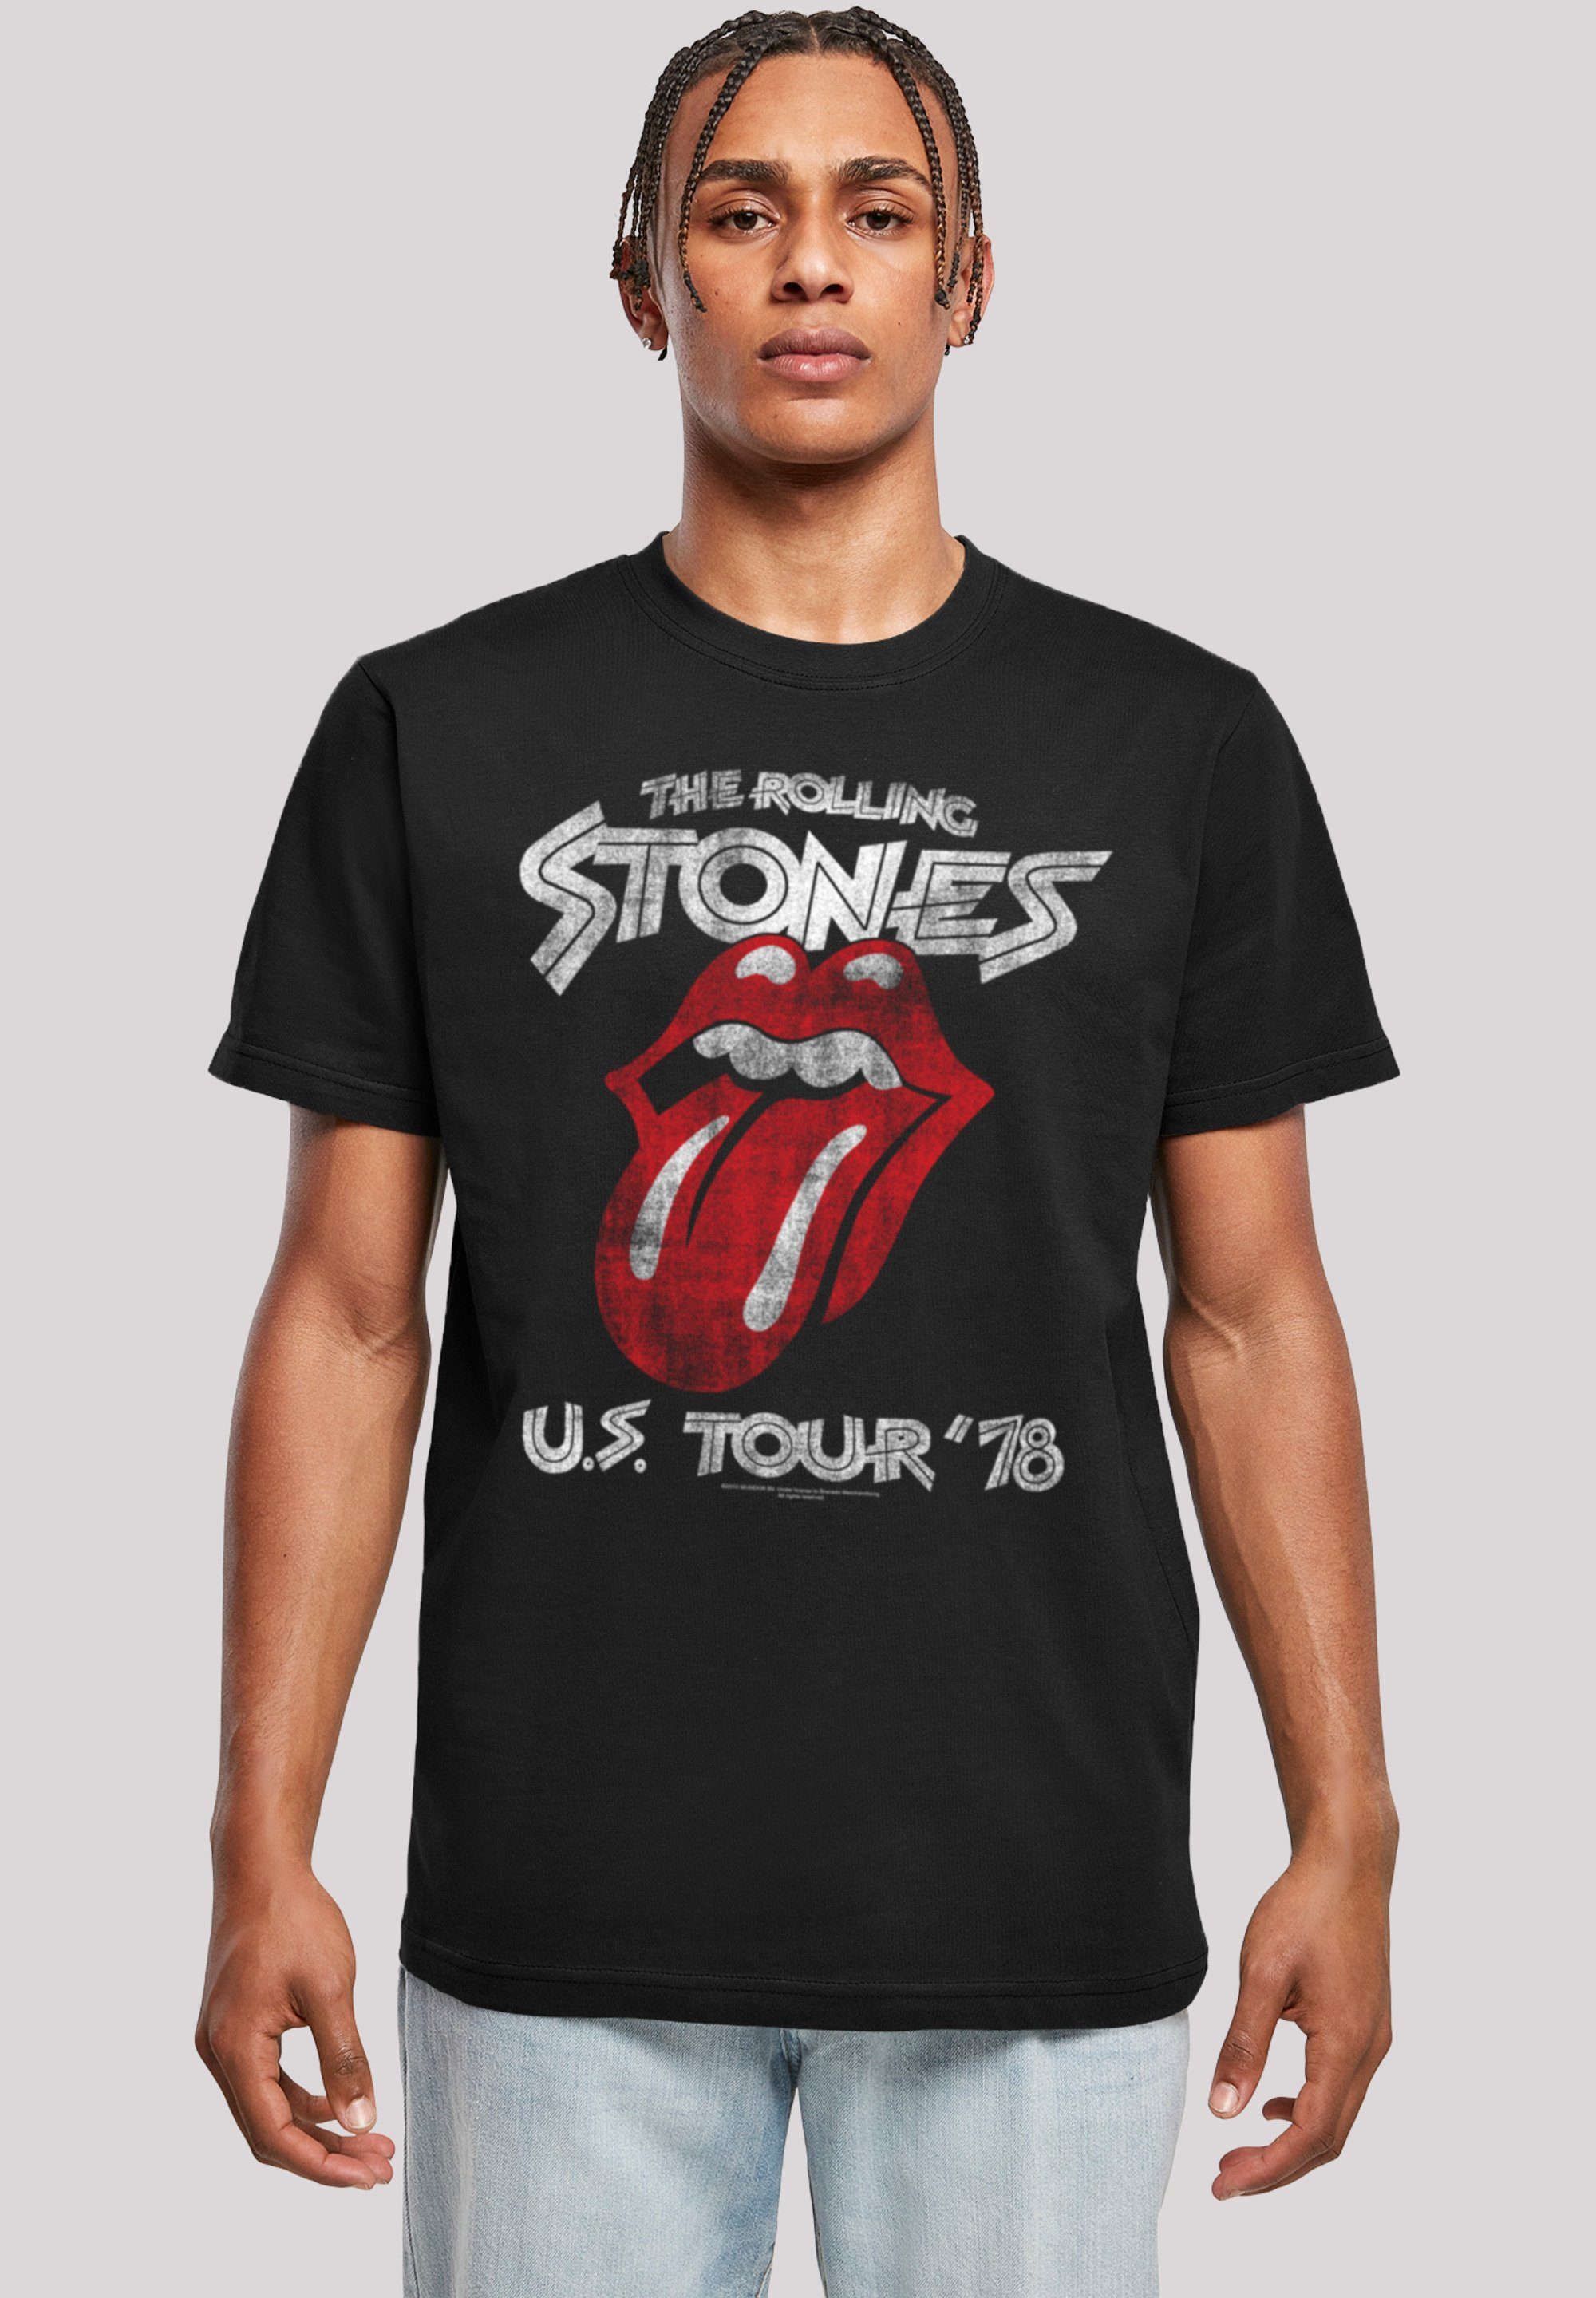 T-Shirt US F4NT4STIC Stones Rolling Rock '78 Print Band Front Tour The